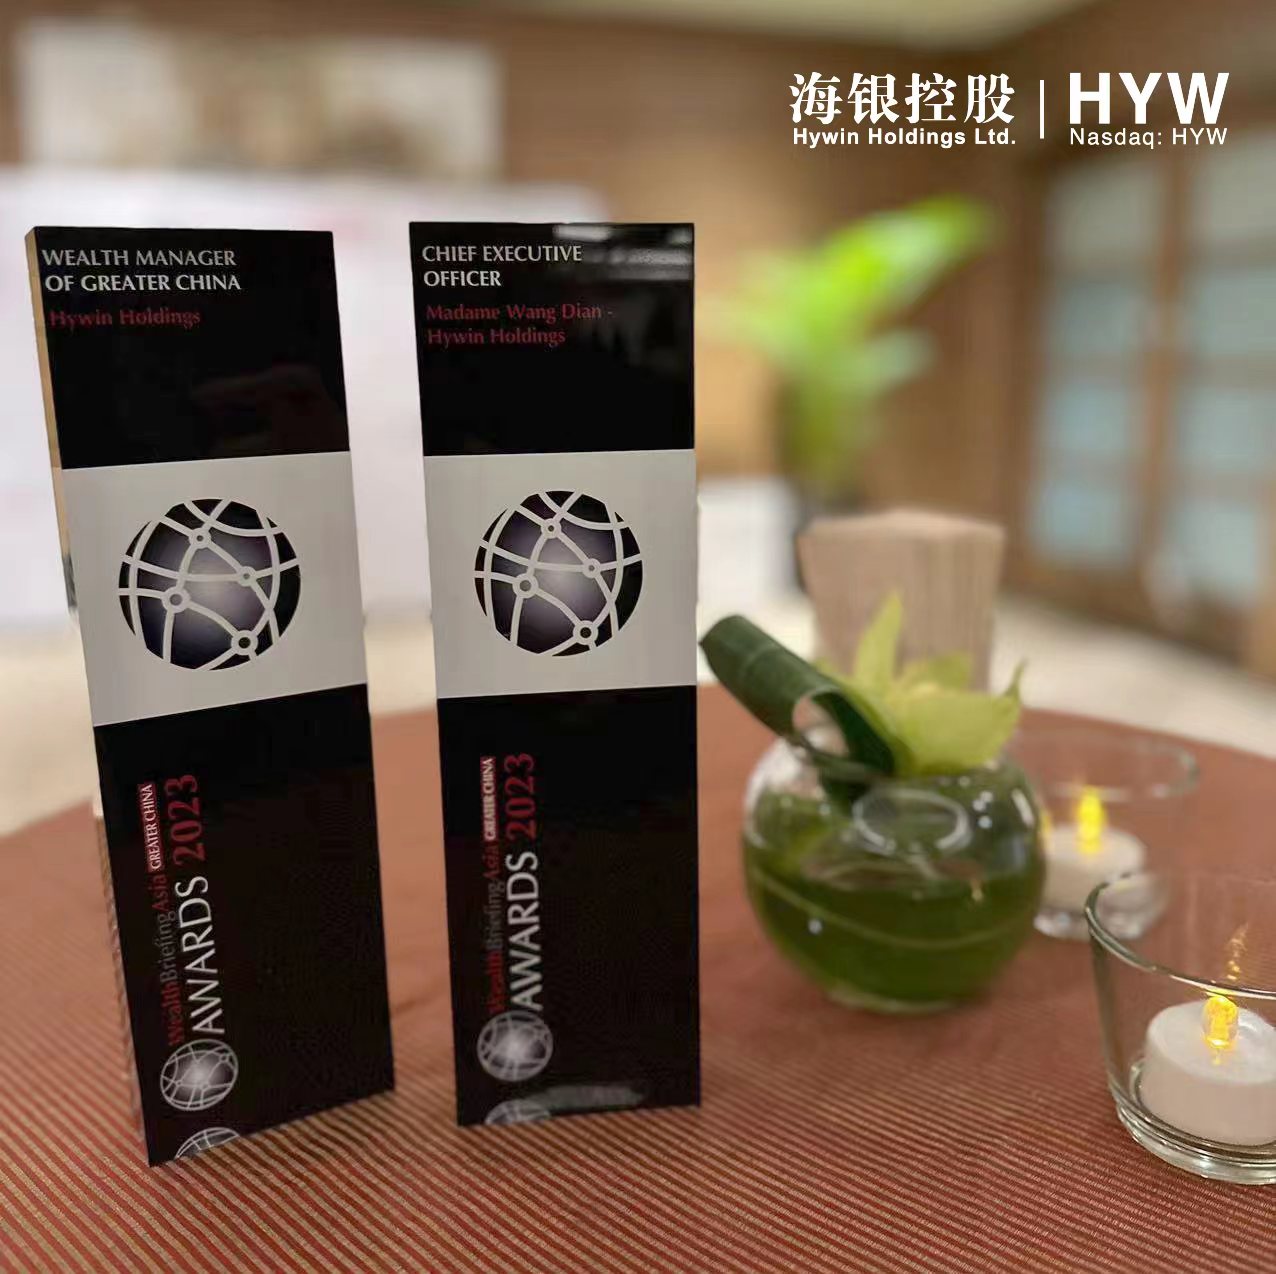 The two awards won by Hywin in WealthBriefingAsia Greater China Awards 2023